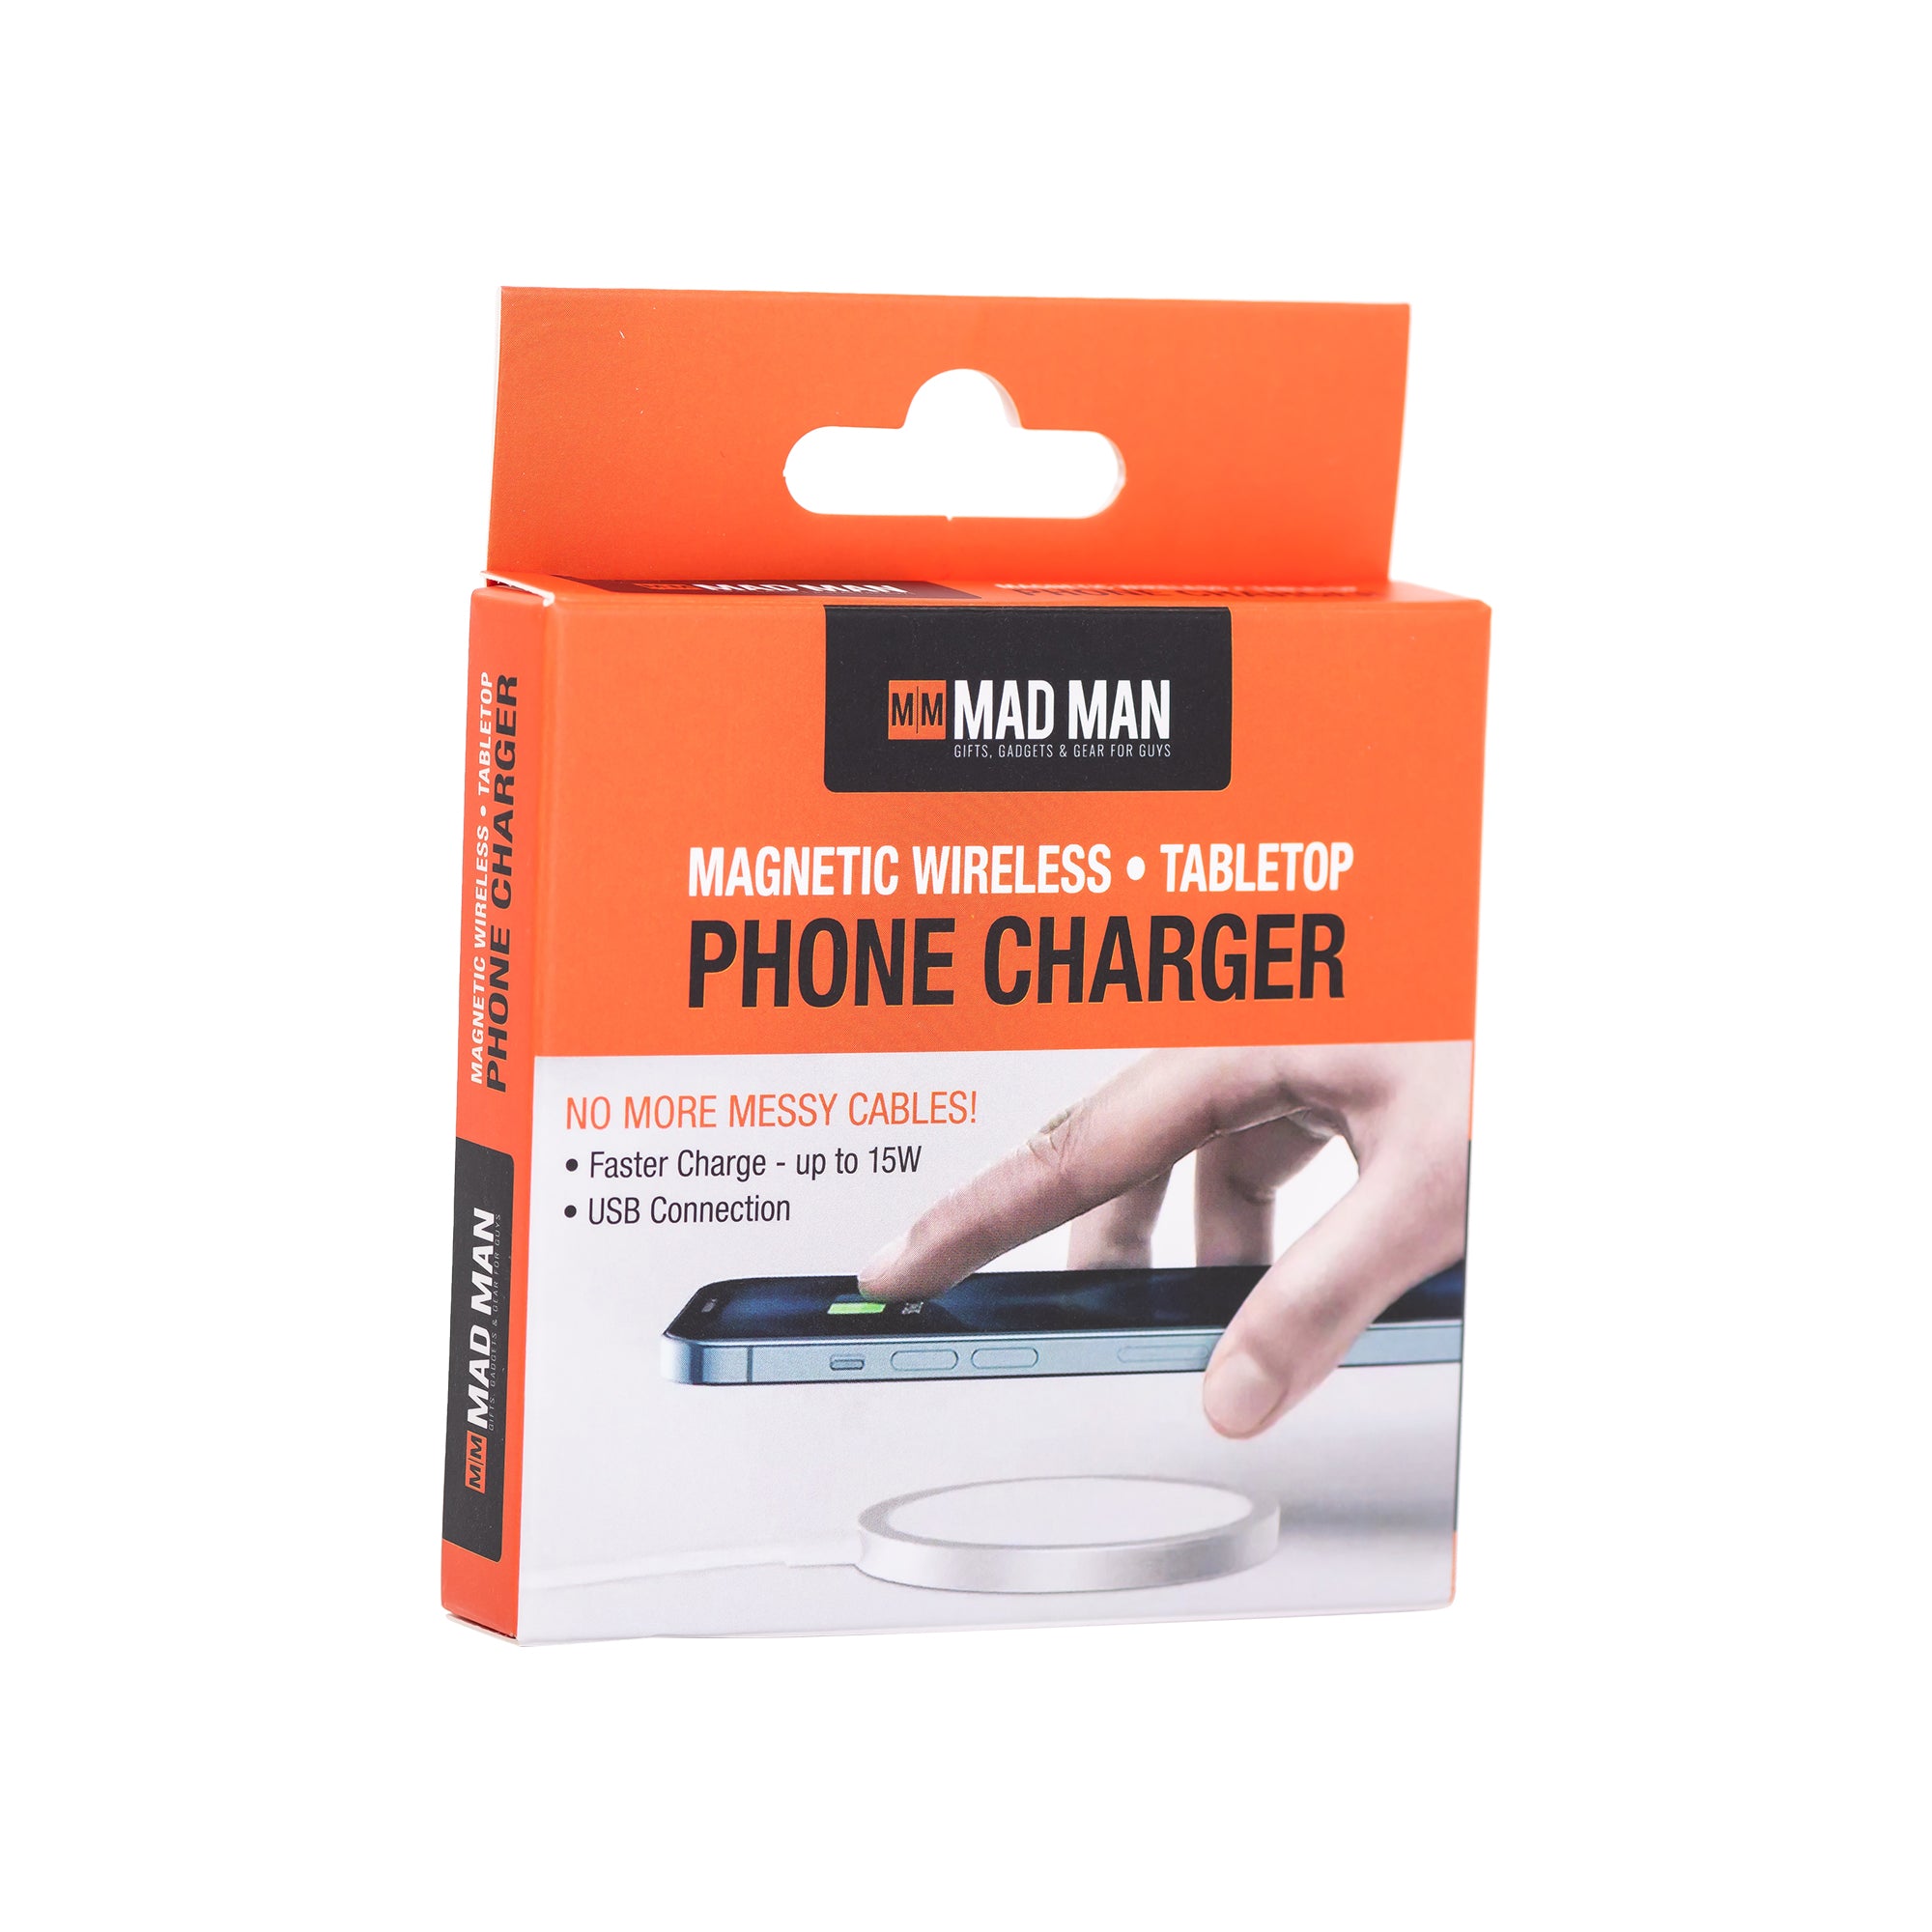 Magnetic Wireless Tabletop Phone Charger